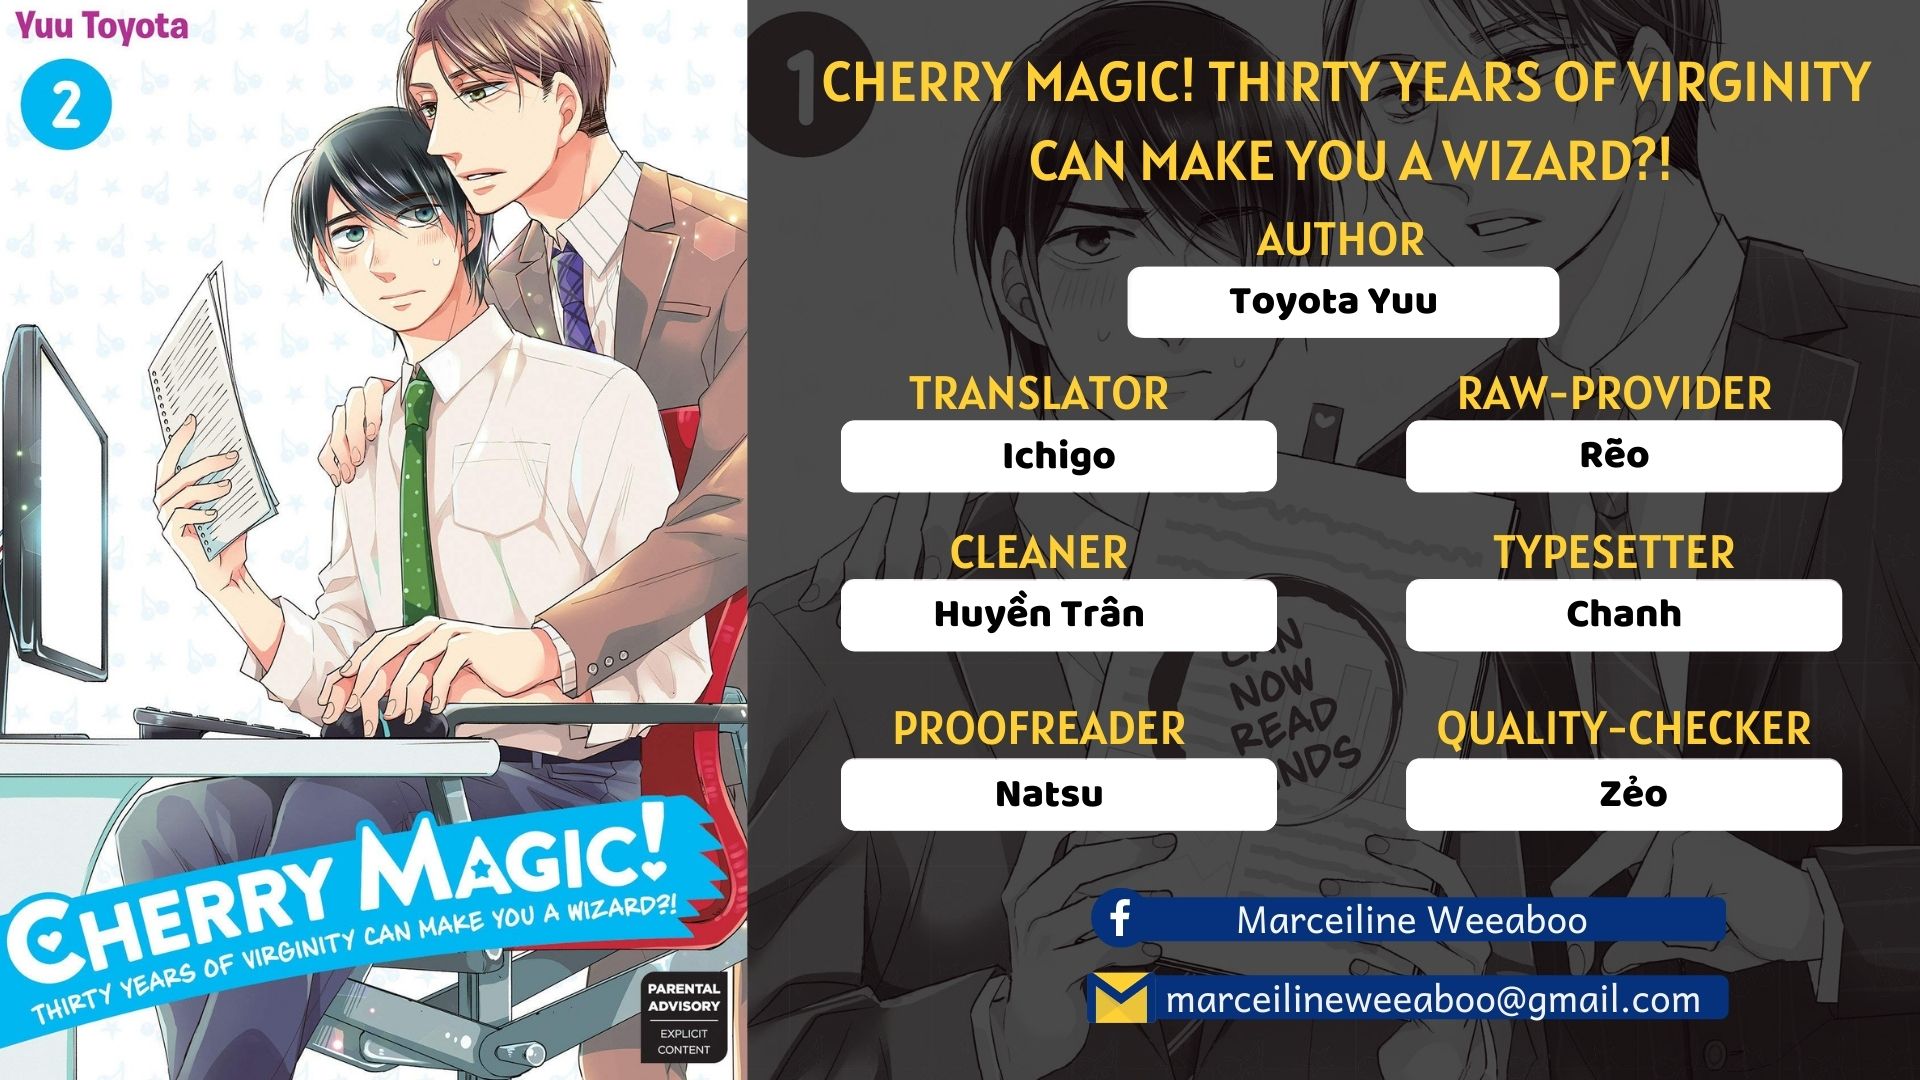 Cherry Magic! Thirty Years of Virginity Can Make You a Wizard?!